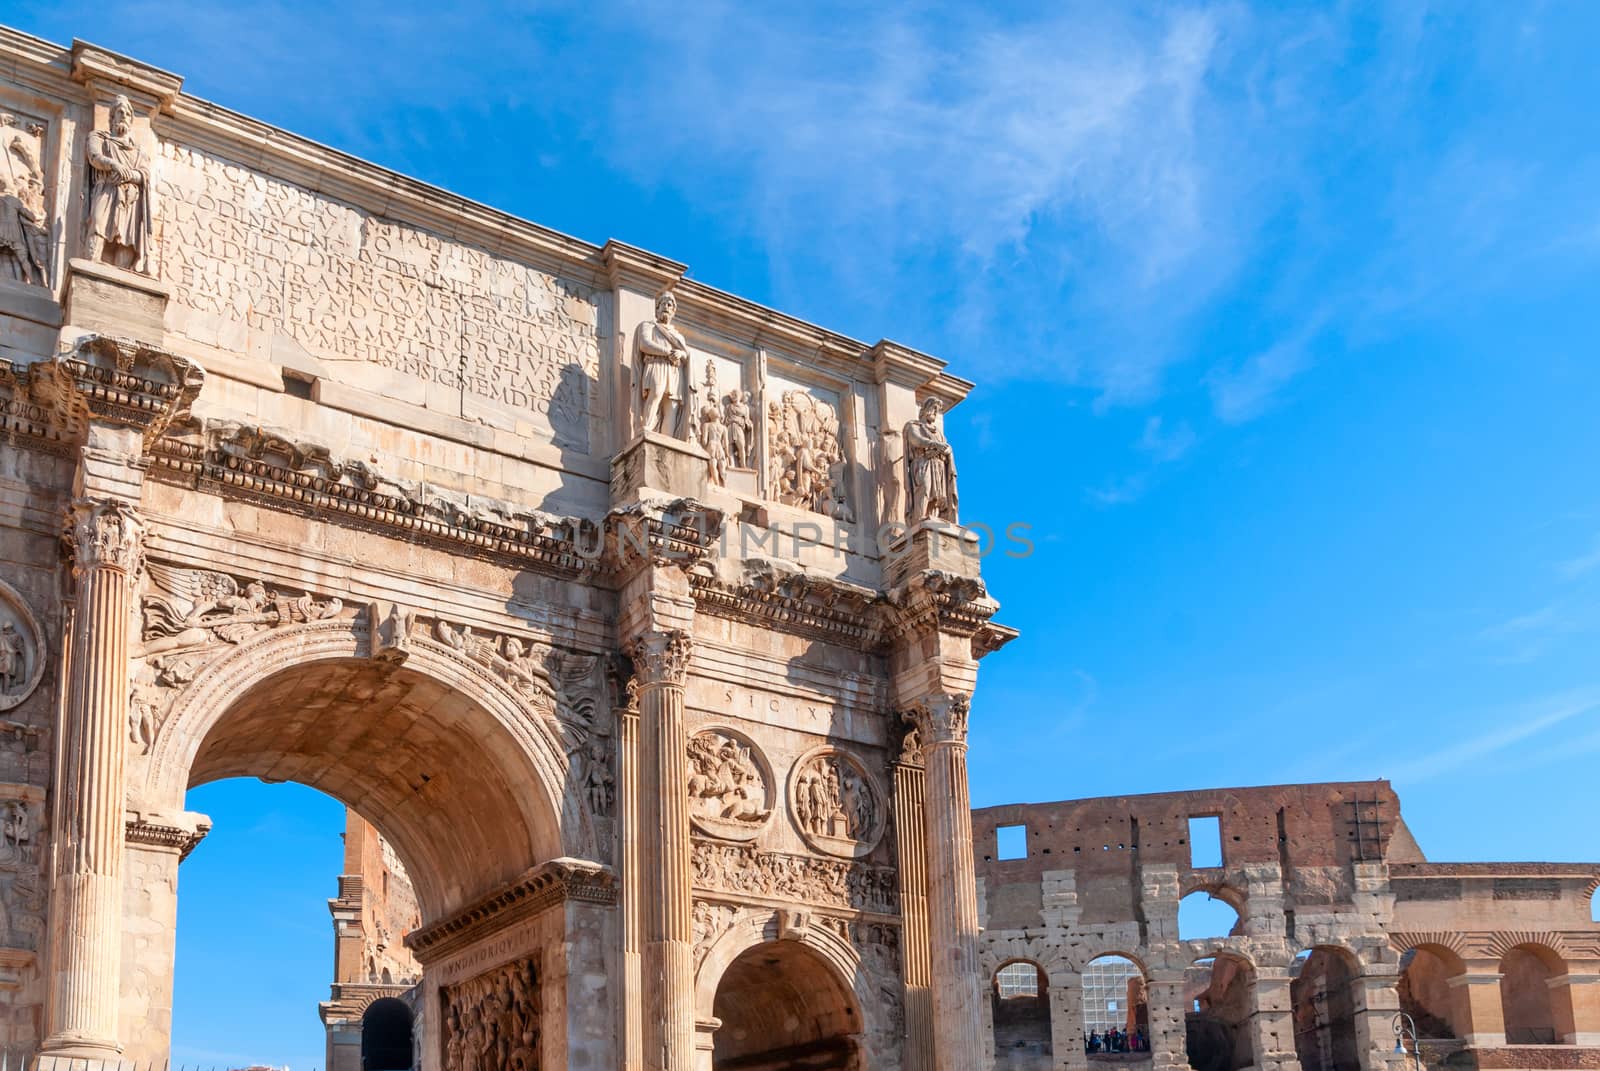 Arch of Constantine and Colosseum in Rome, Italy. Triumphal arch in Rome, Italy. North side, from the Colosseum. Colosseum is one of the main attractions of Rome.